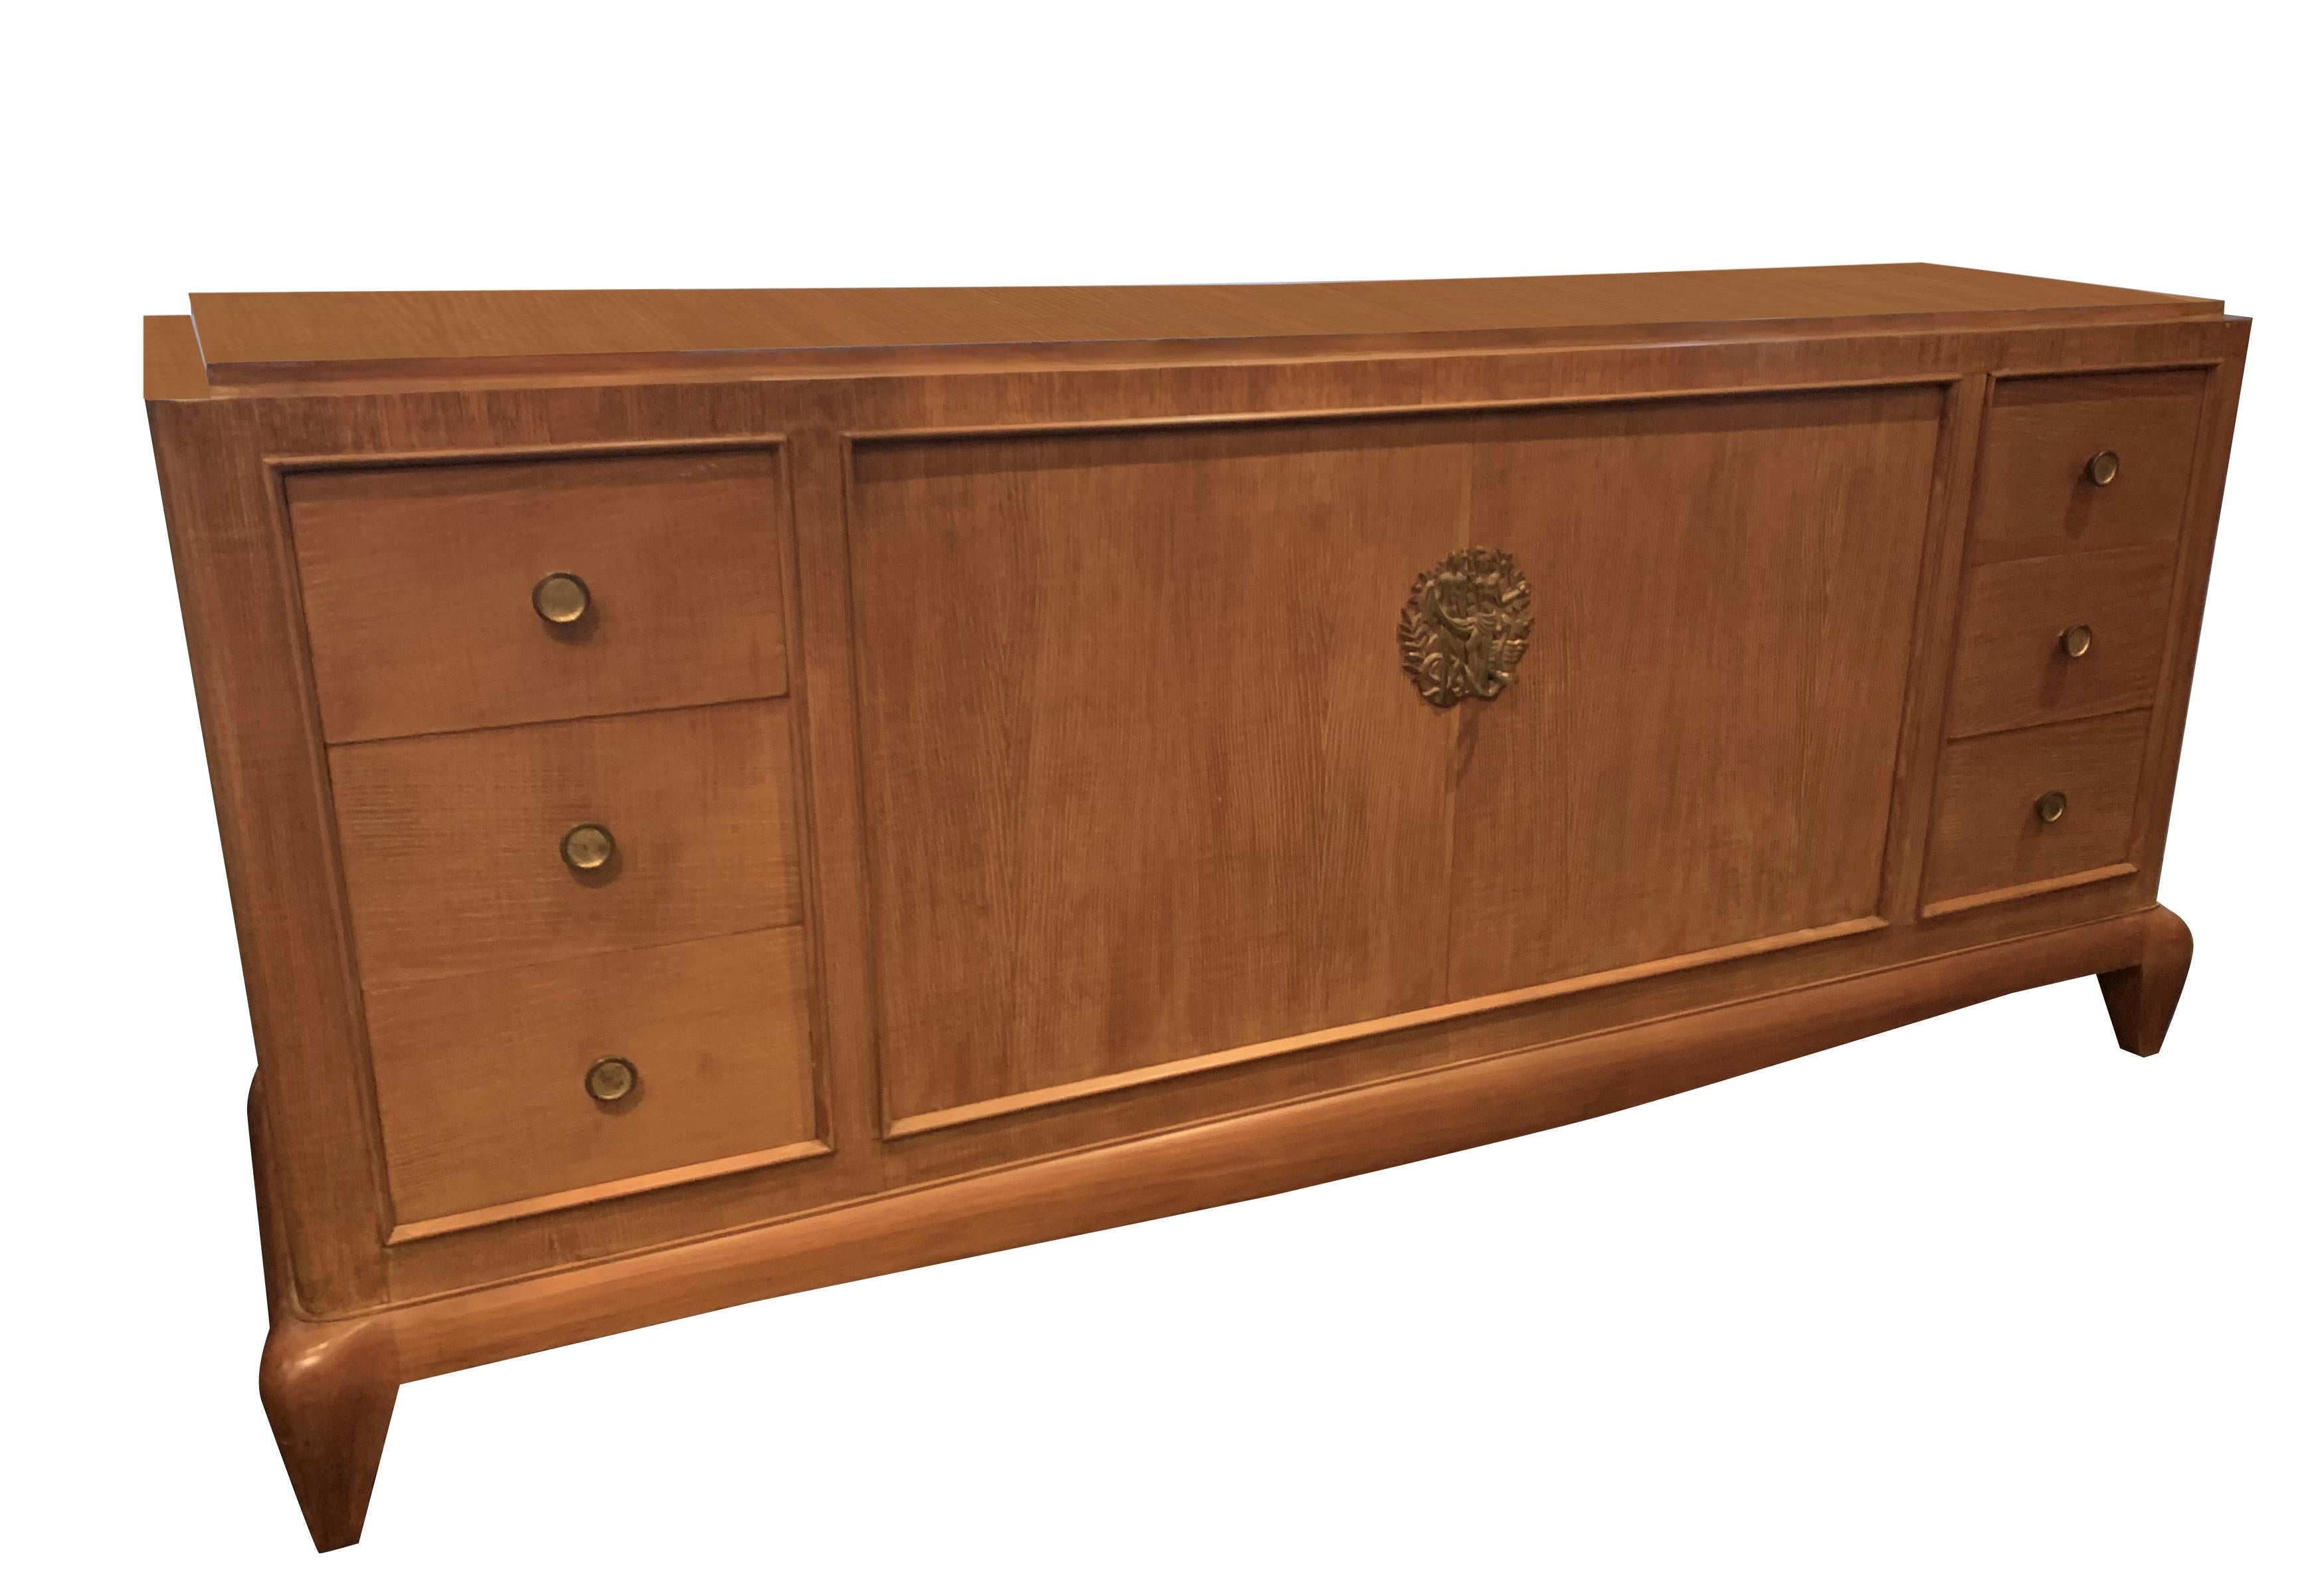 1940's French credenza designed by Jules Leleu.
Two front doors with signature bronze escutcheon depicting Adam and Eve at key closure.
Two sets of three drawers, on either end of credenza.
Blonde ash wood.
Recently restored.
Top width is